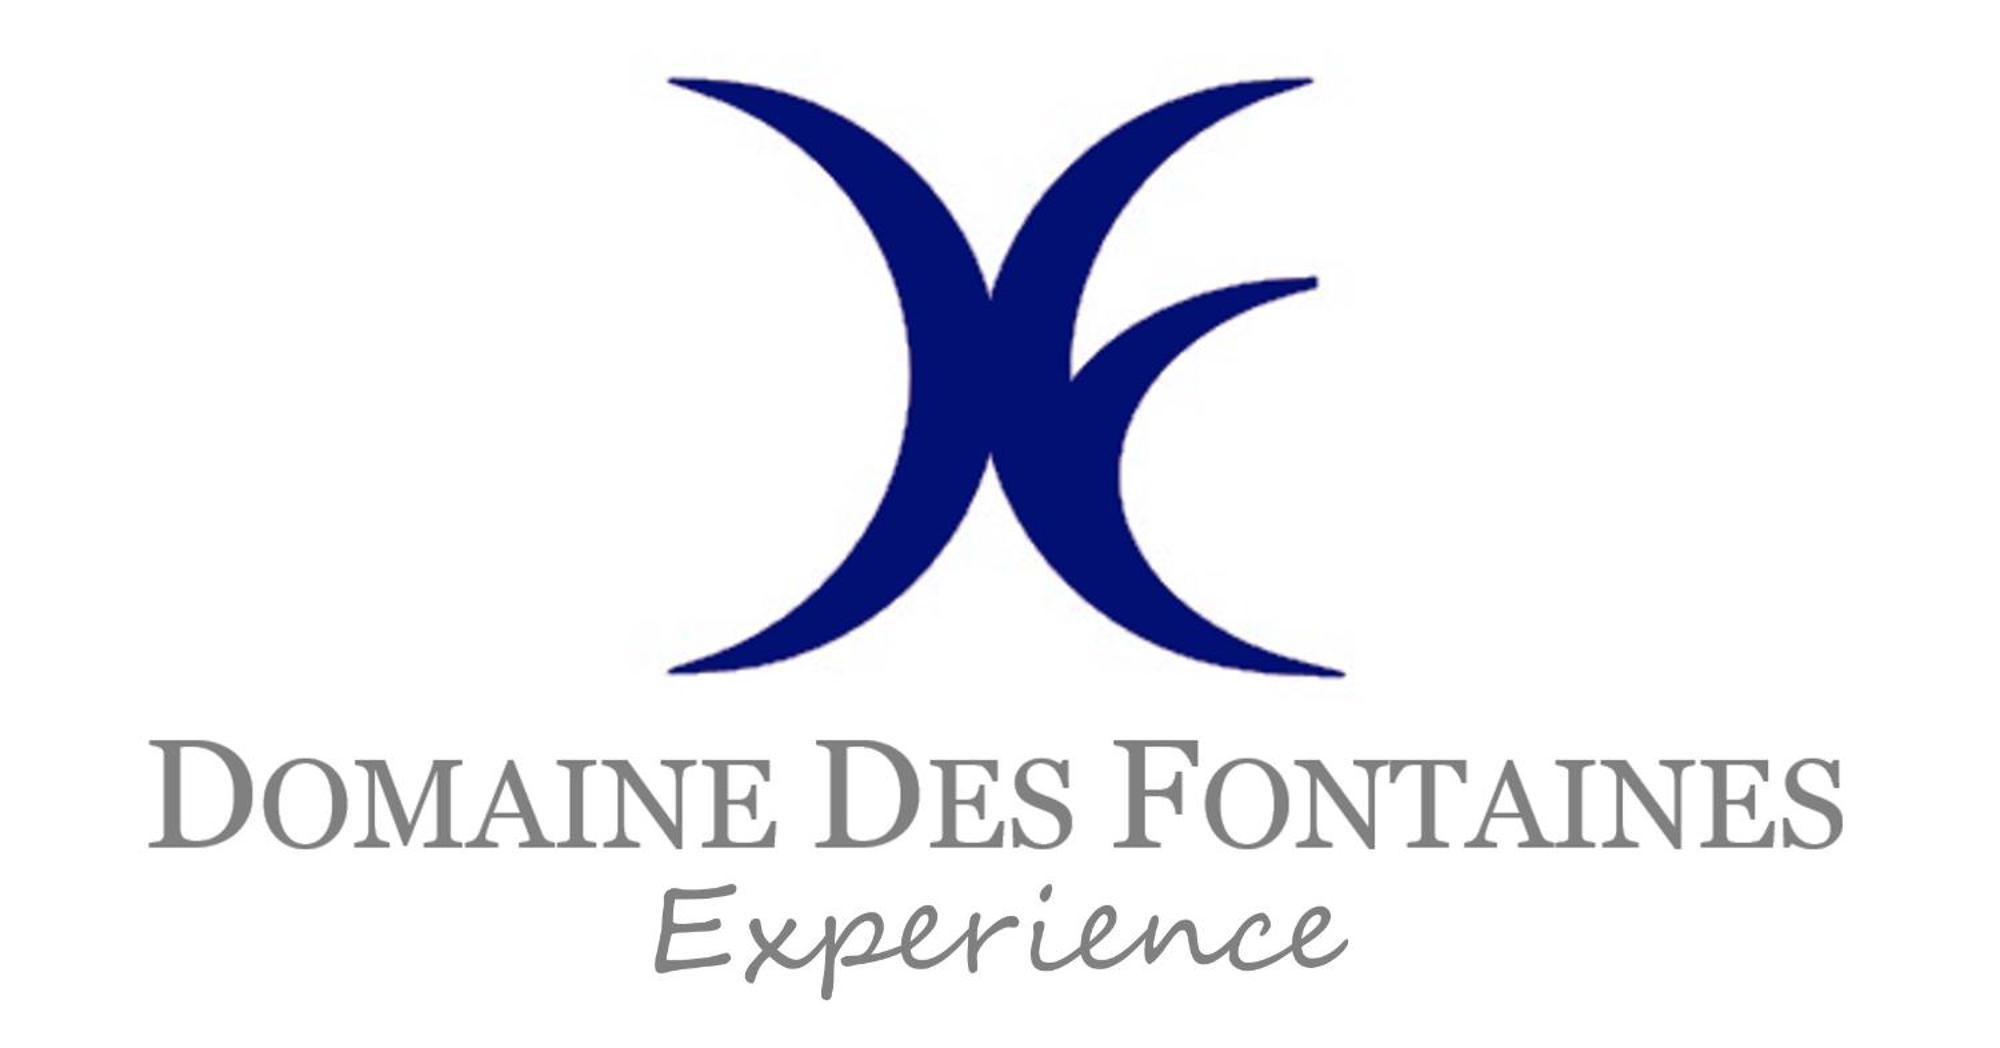 Le Domaine Des Fontaines - Experience 호텔 베르닌 외부 사진